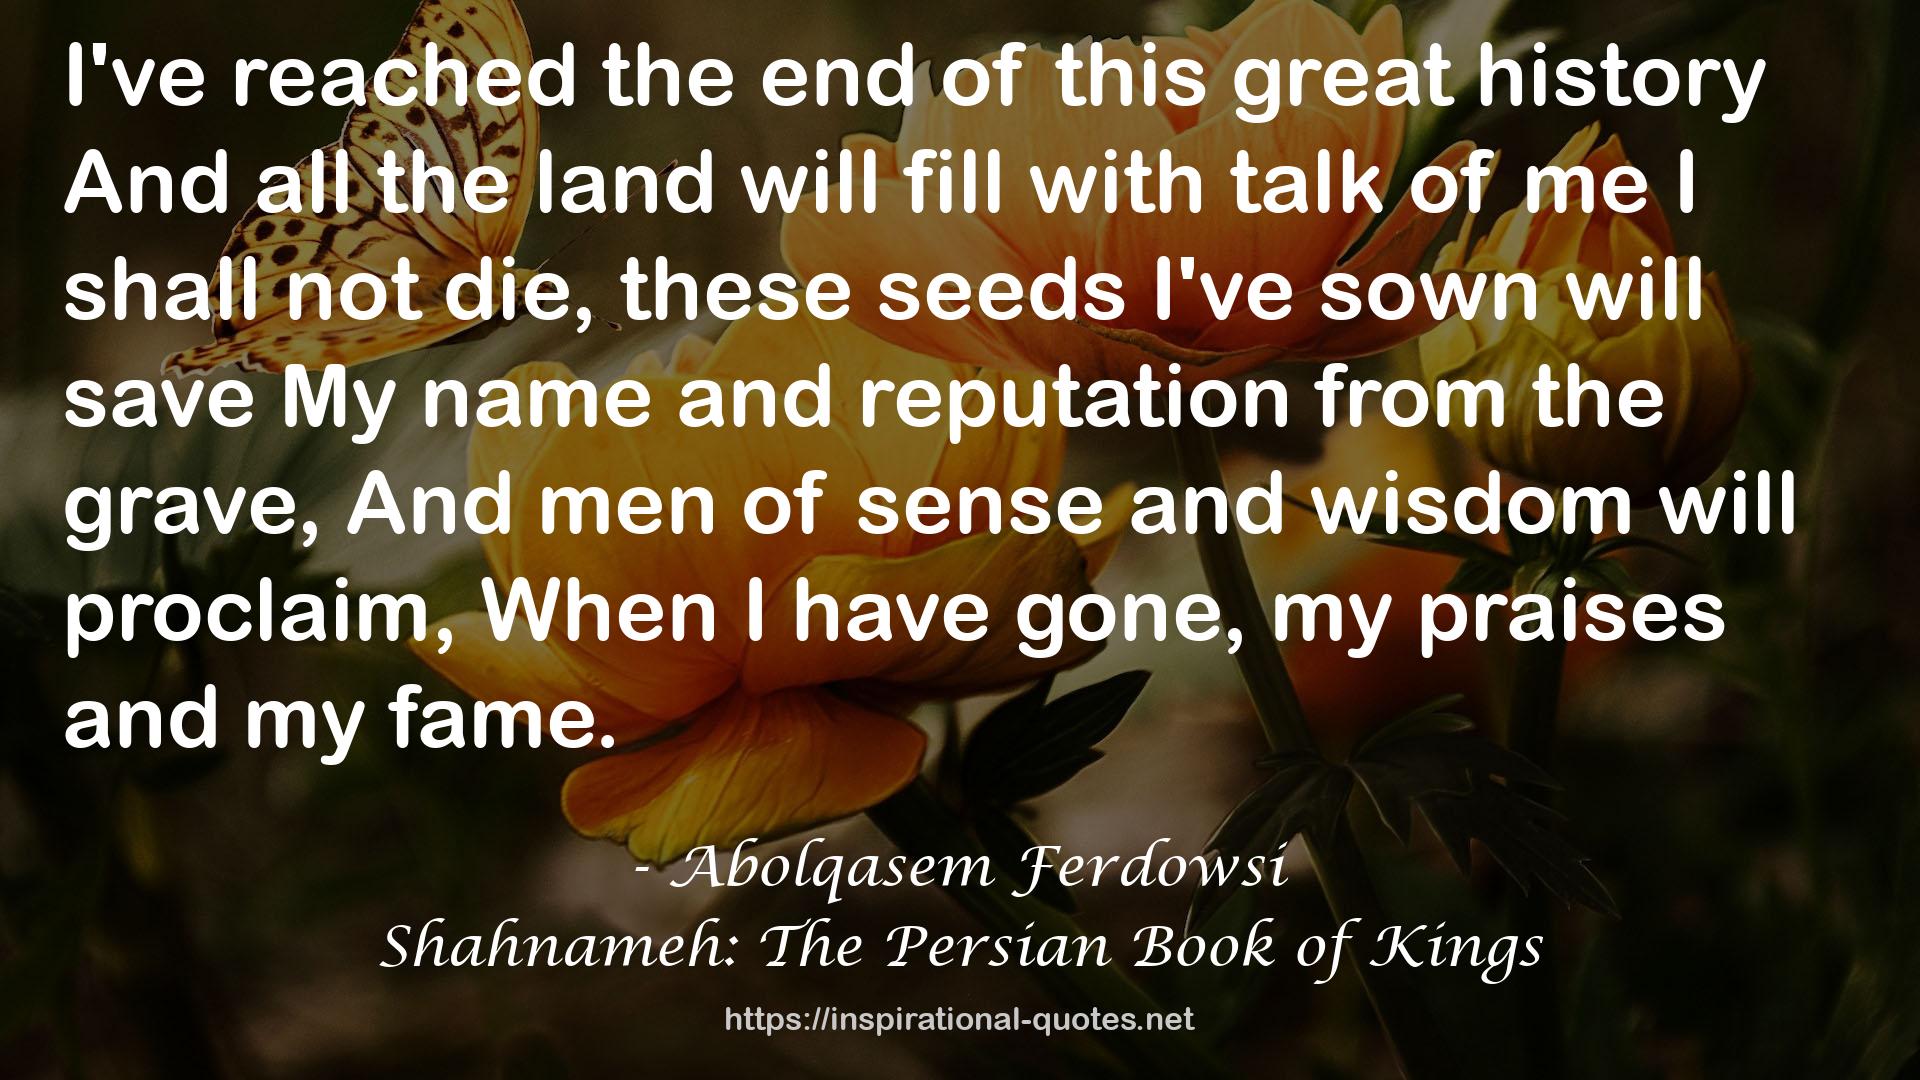 Shahnameh: The Persian Book of Kings QUOTES